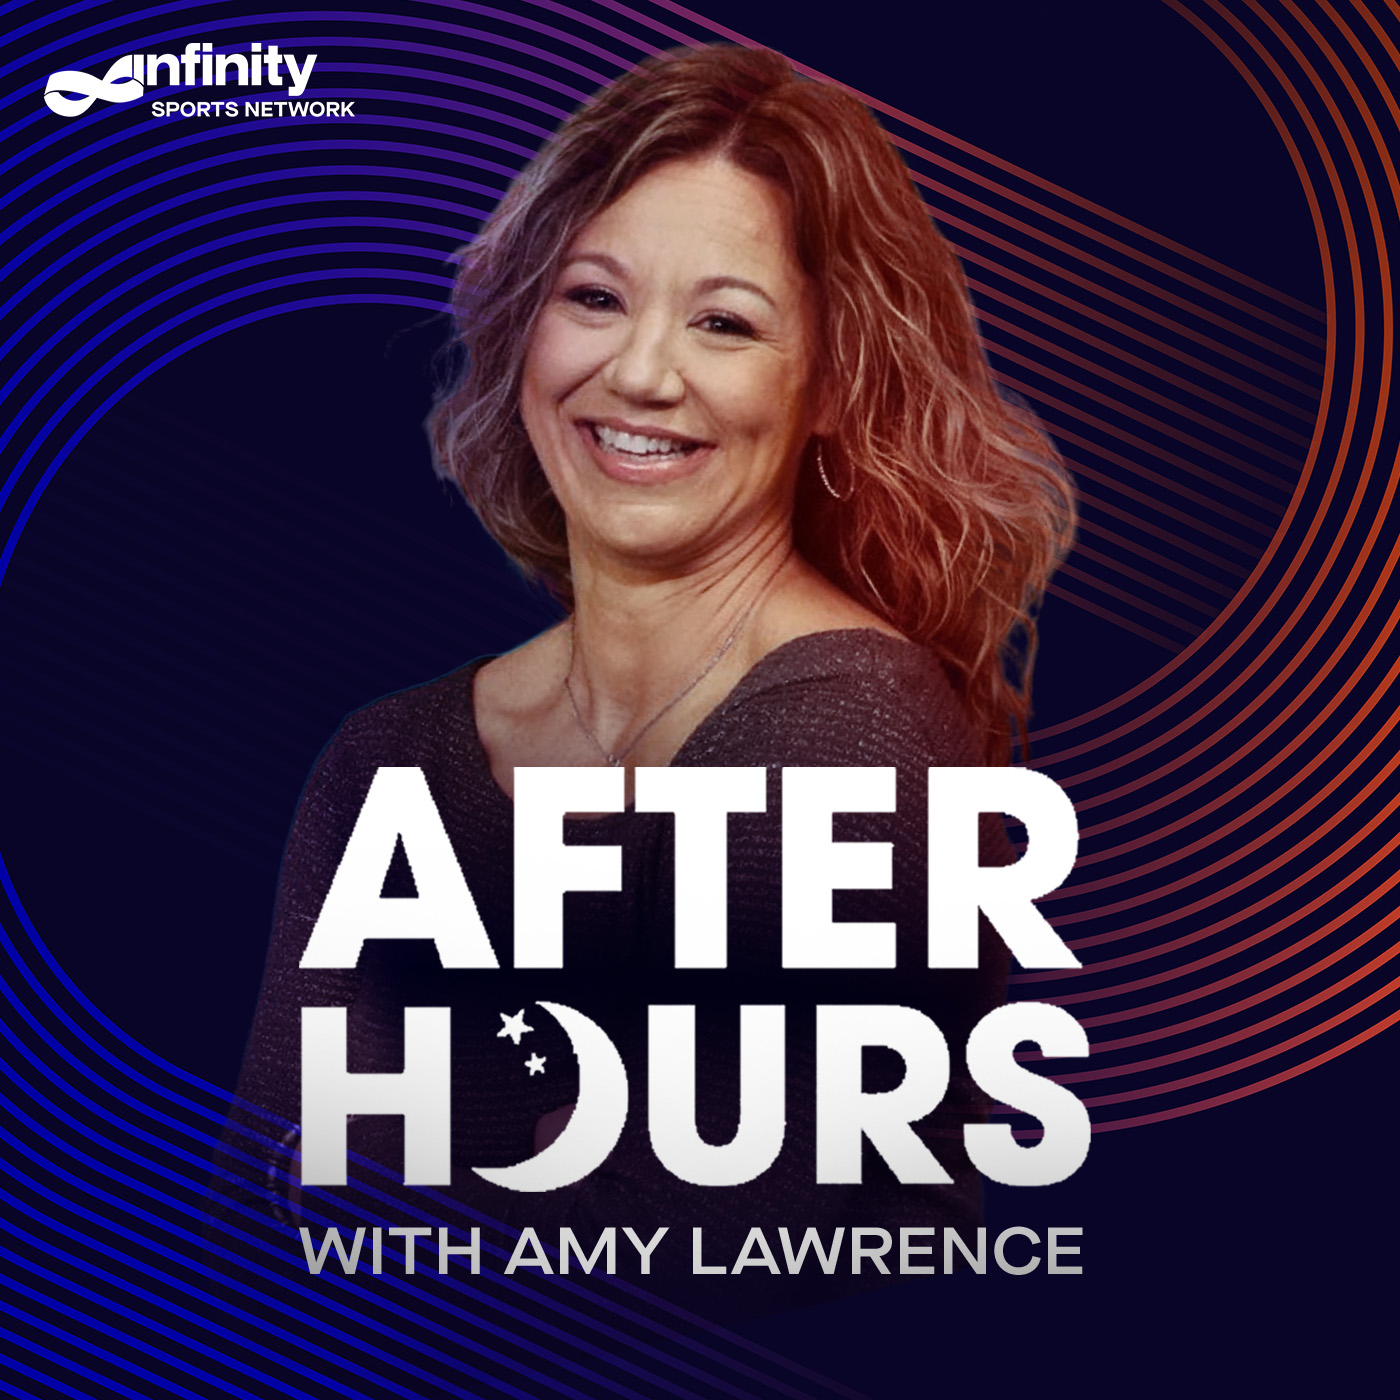 10-14-21 After Hours with Amy Lawrence PODCAST: Hour 4